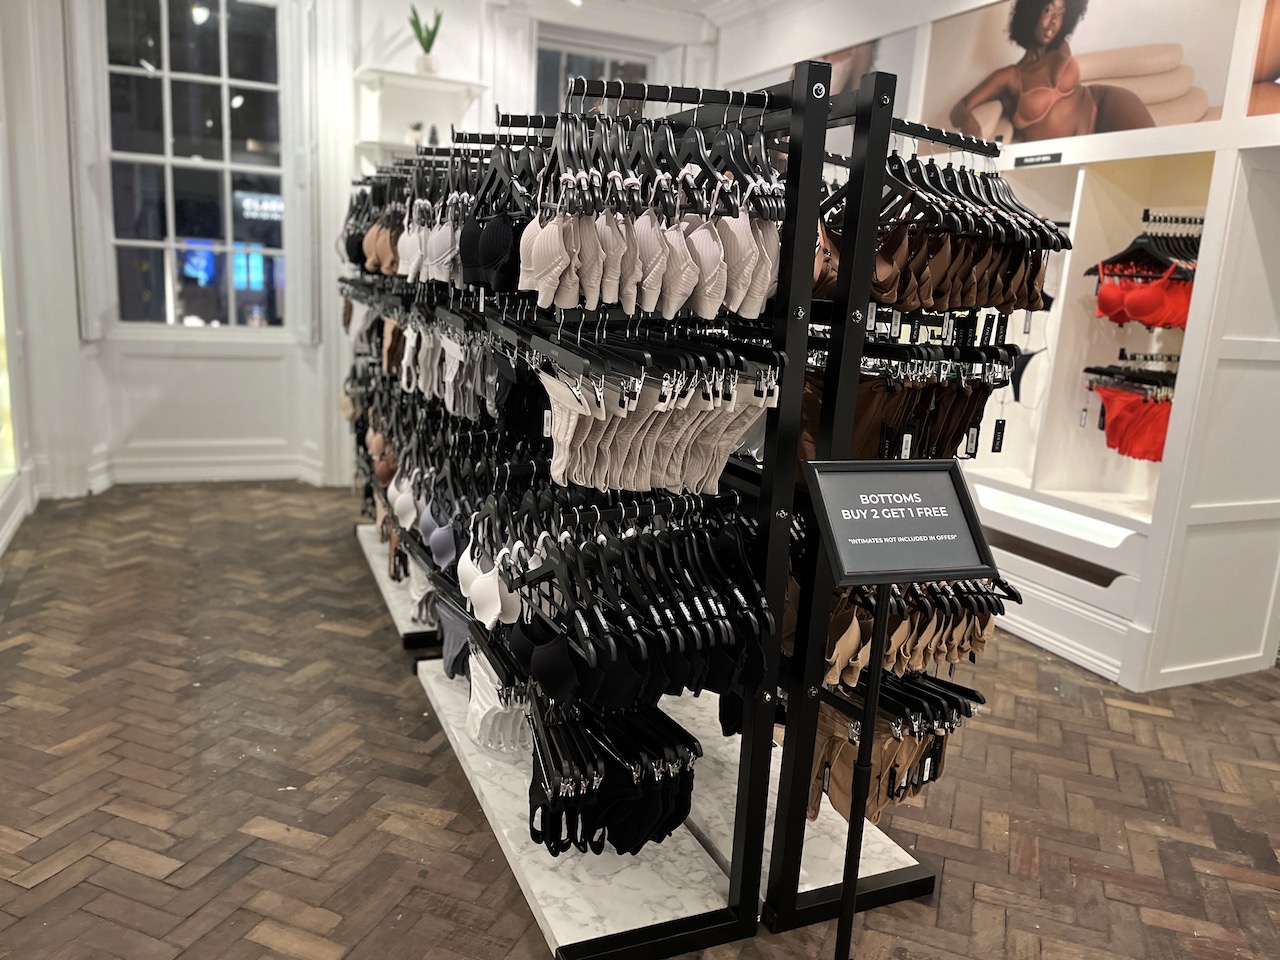 Comfort Made Sexy' lingerie brand Lounge has opened a week-long